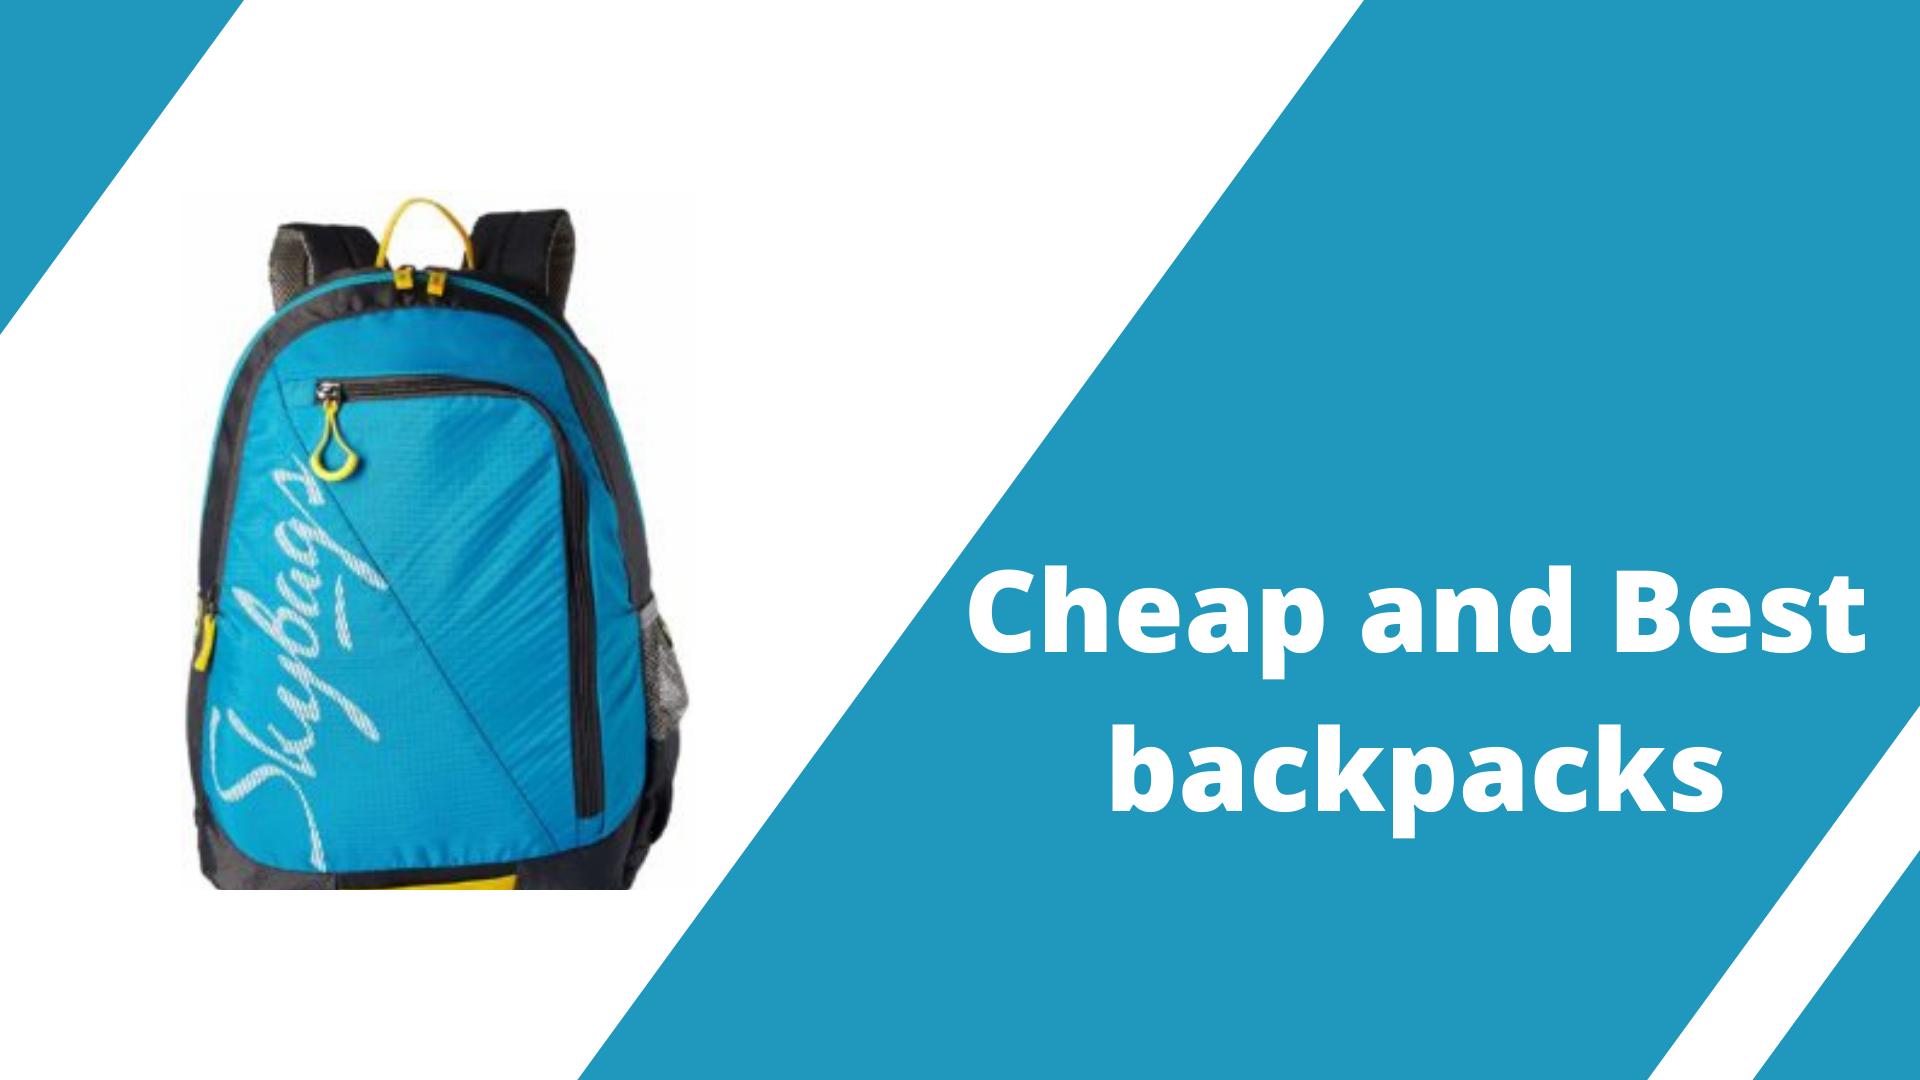 Cheap and best backpacks in india 2021